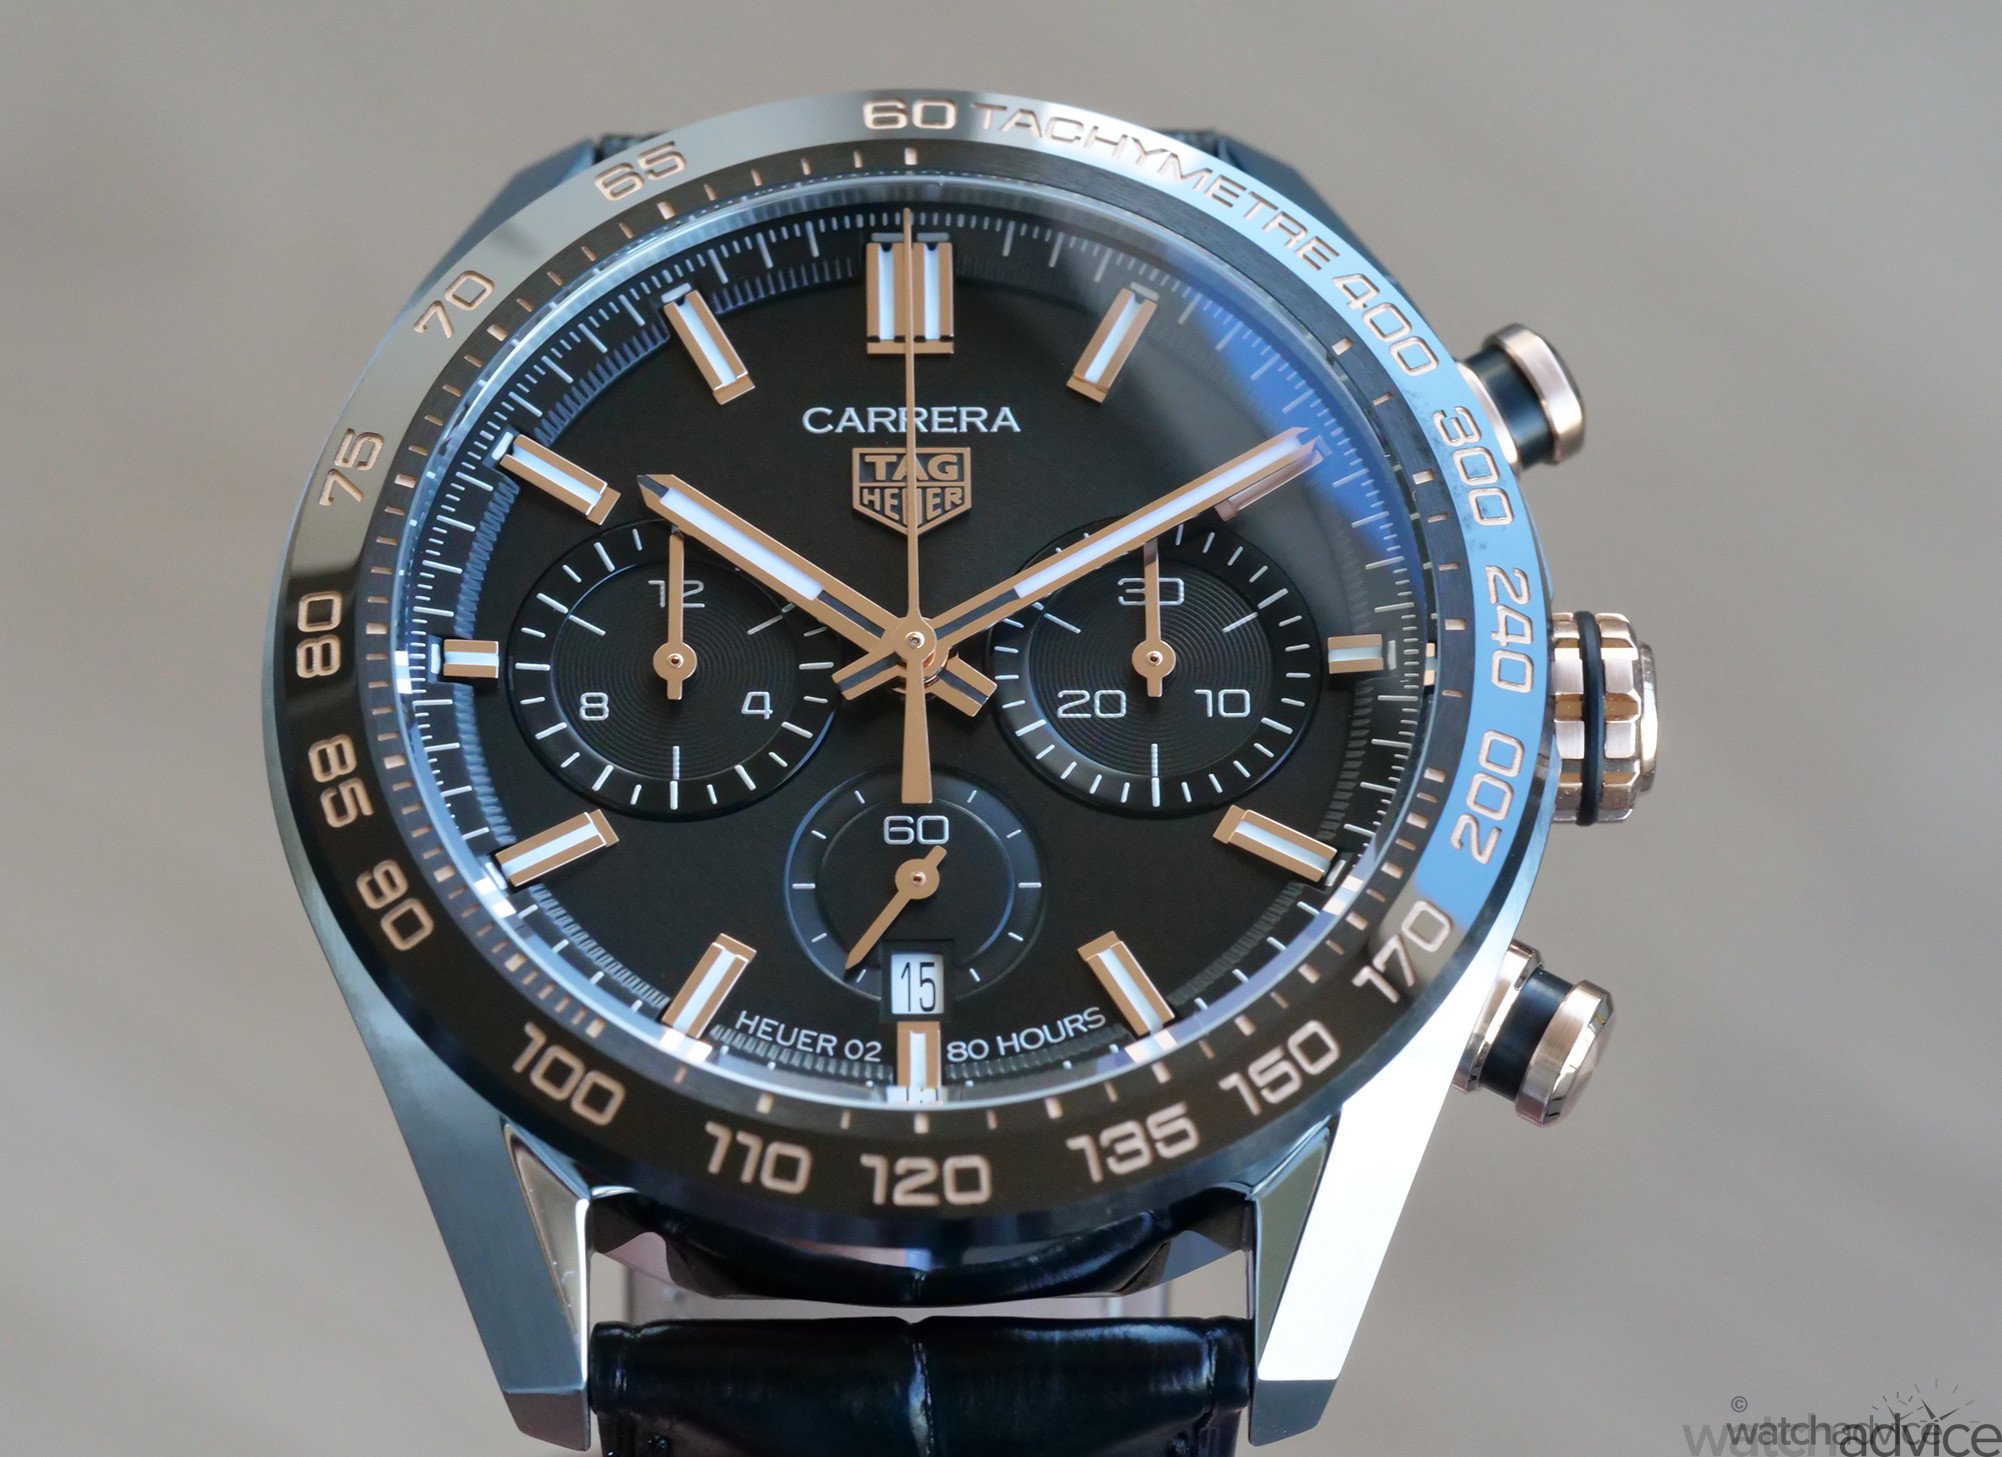 Born to race - review TAG Heuer Carrera Sport Chronograph Calibre HEUER02 -  Watch I Love